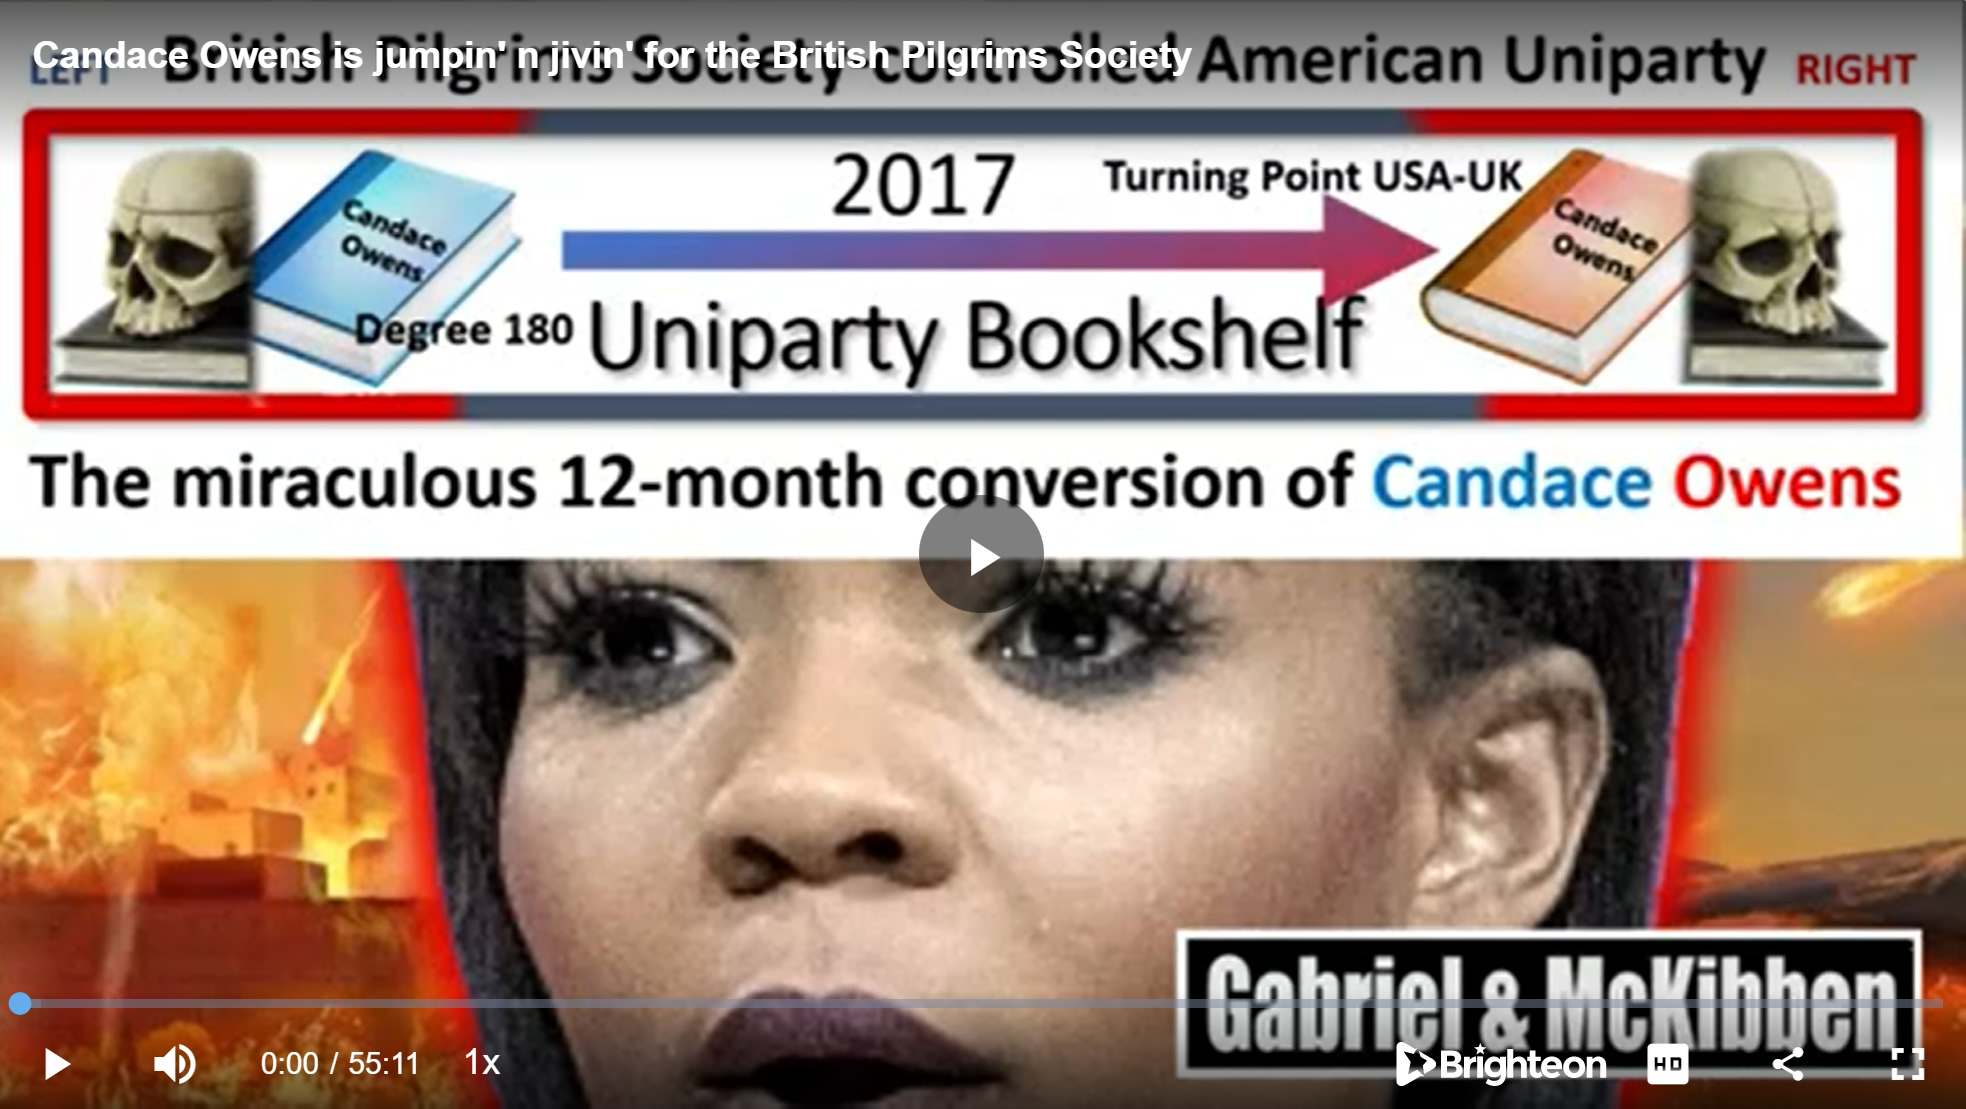 Gabriel, McKibben. (Aug. 10, 2022). Candace Owens Jumpin' and Jivin' for the Pilgrims Society. American Intelligence Media, Americans for Innovation.